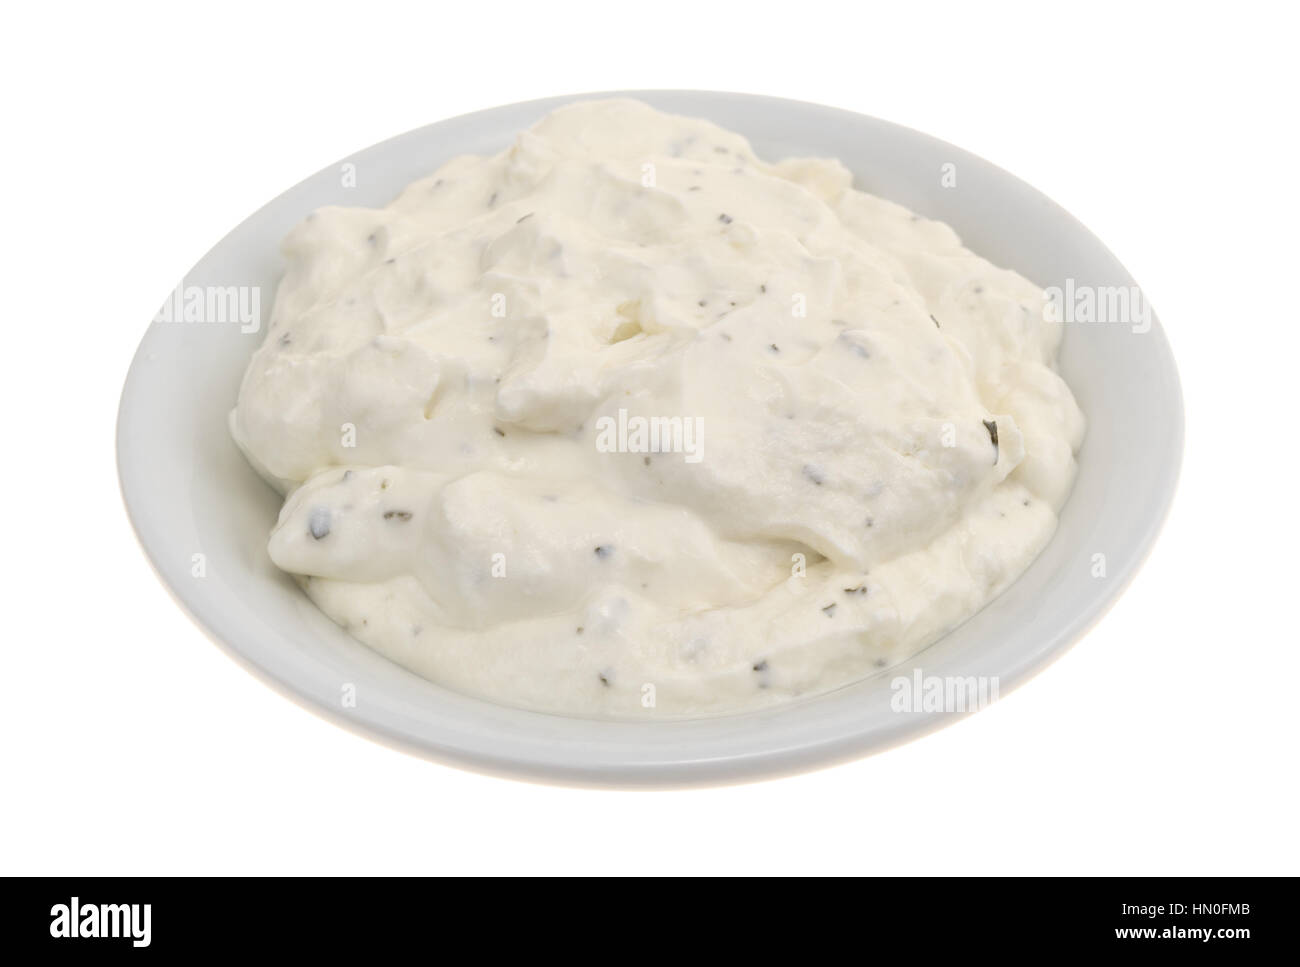 Side view of  a small bowl filled with fresh French onion dip isolated on a white background. Stock Photo